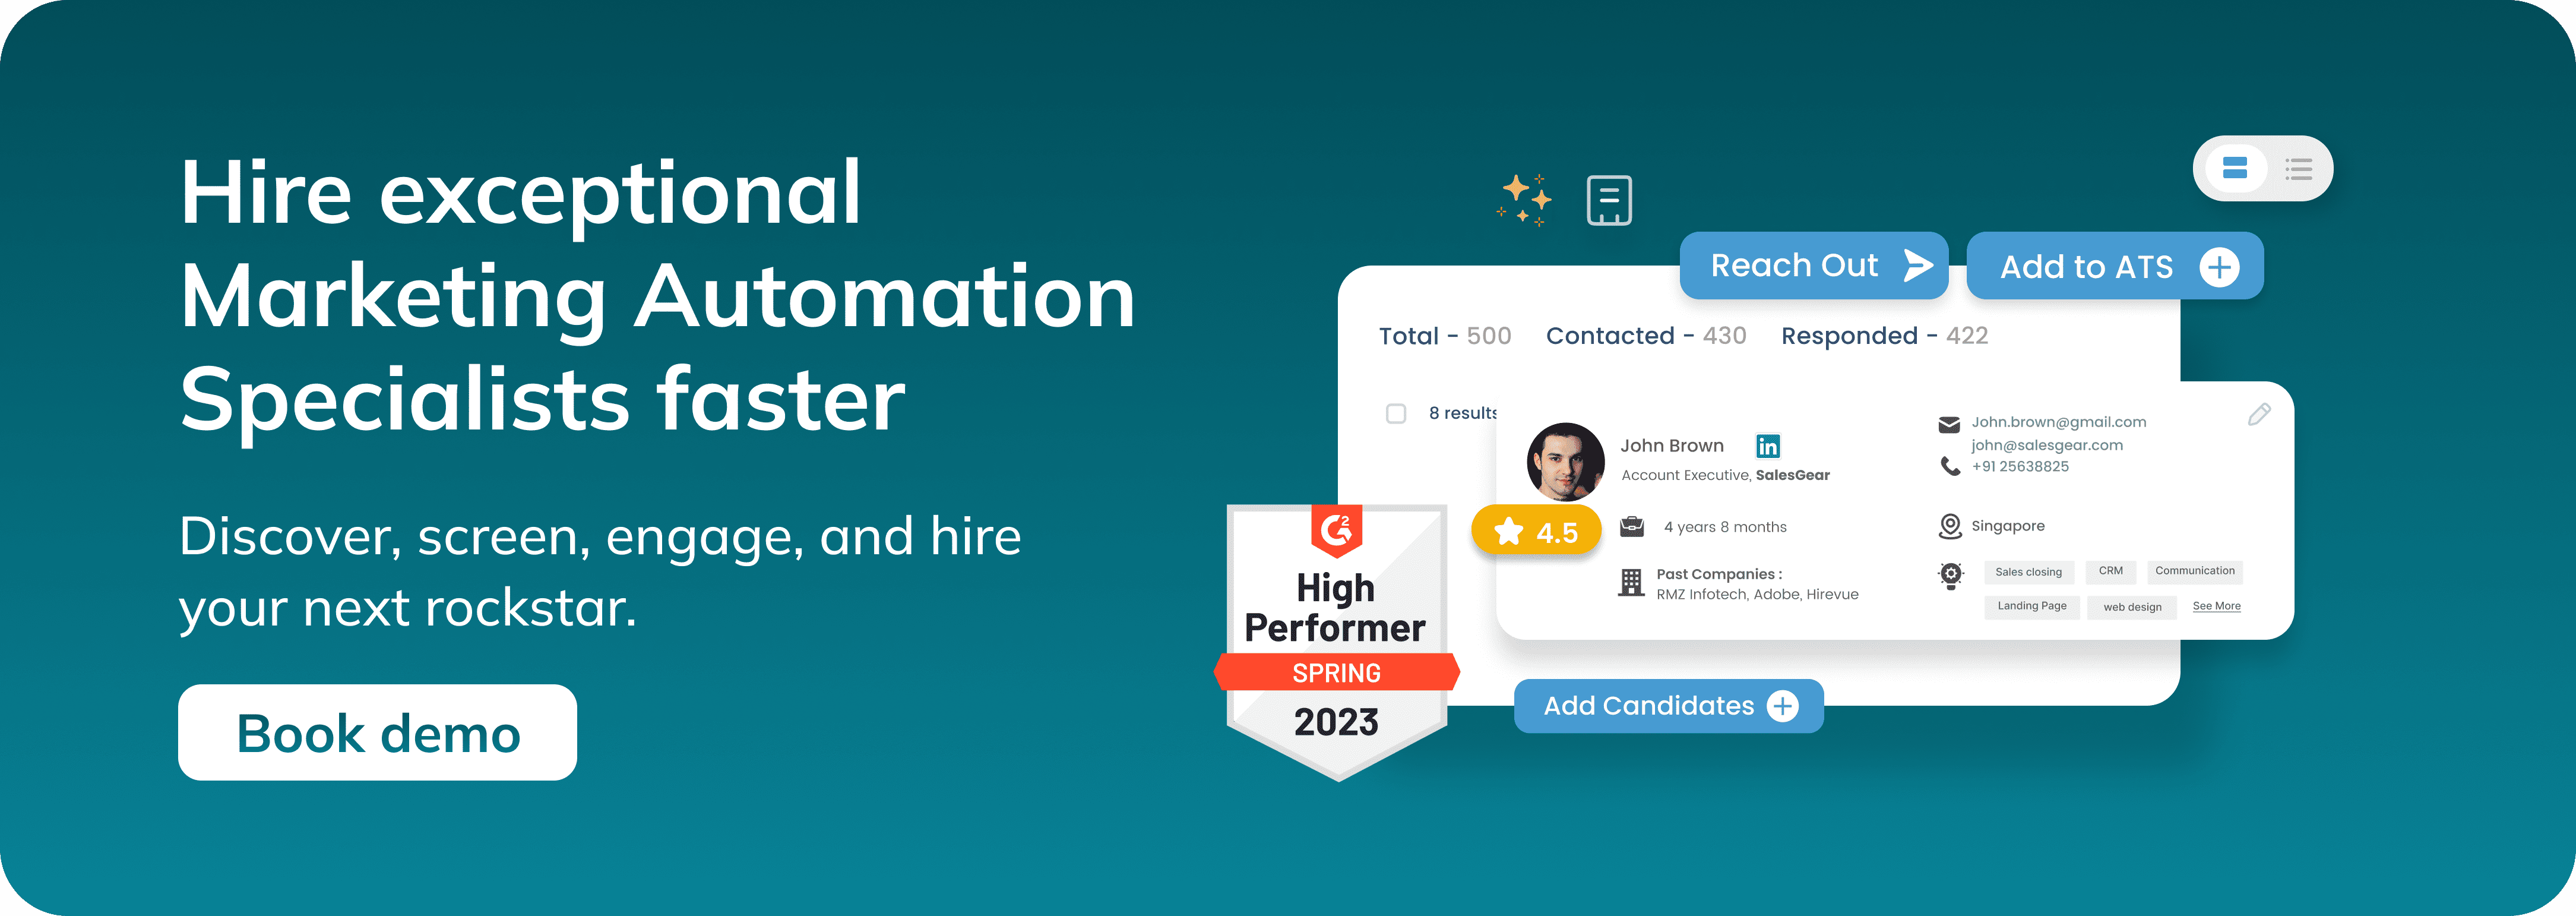 How to hire the perfect Marketing Automation Specialists.png